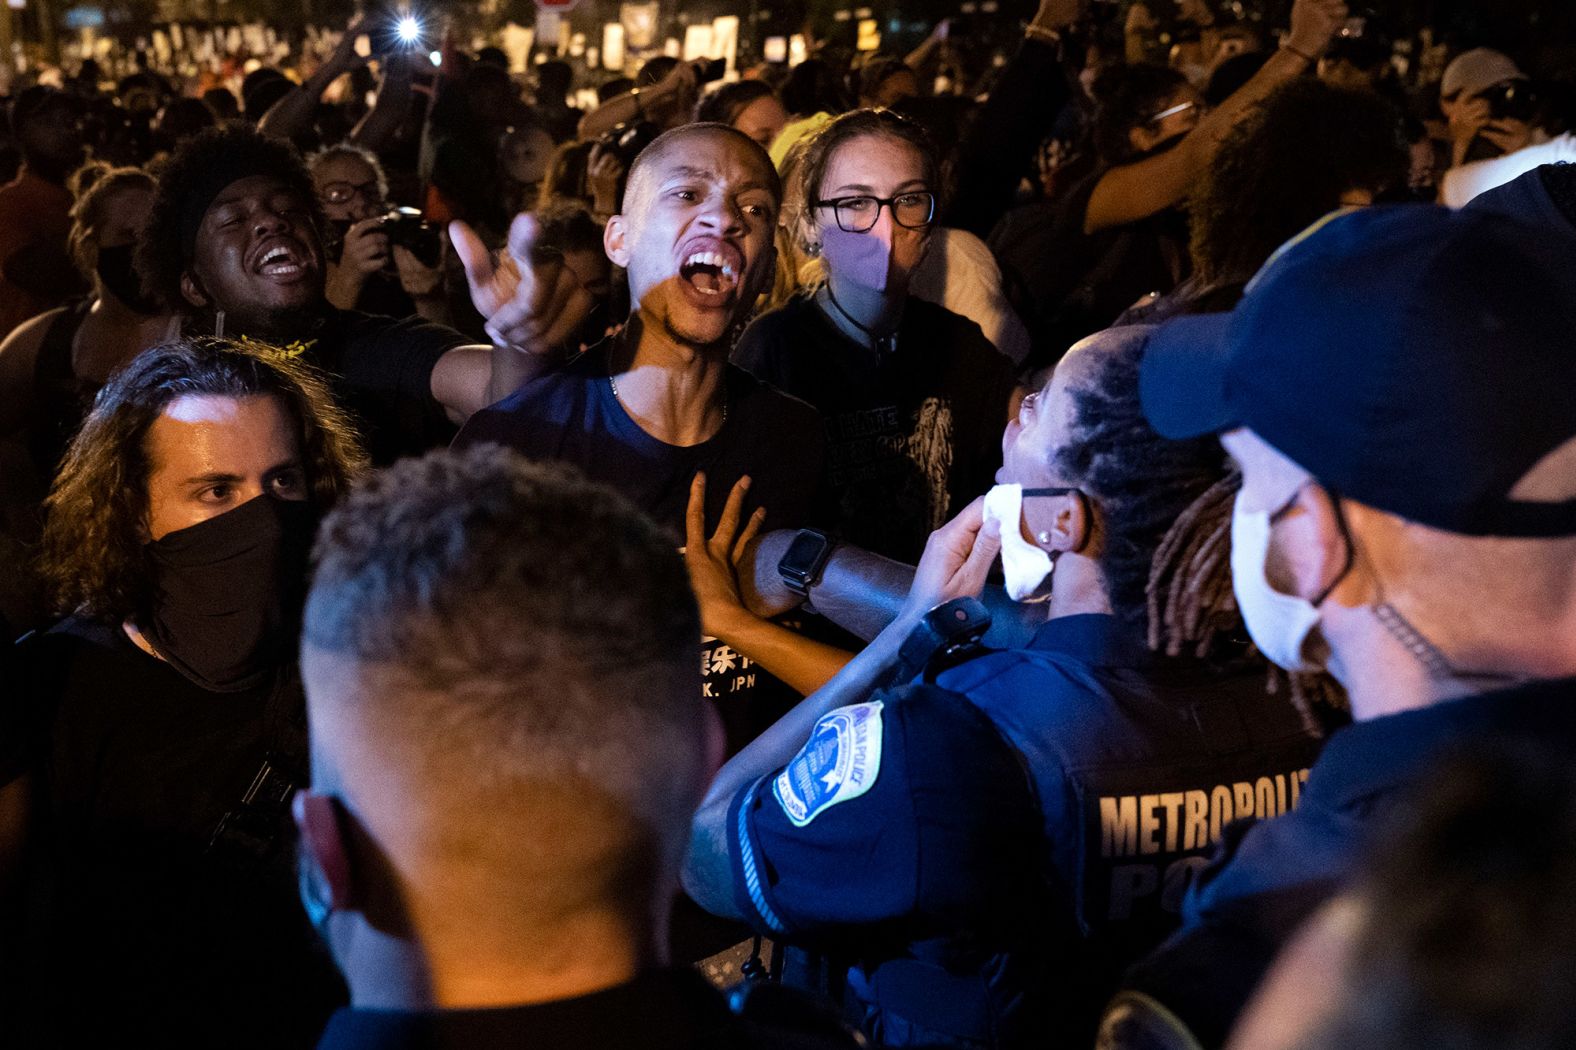 Demonstrators confront police officers during a rally outside the White House on Thursday.